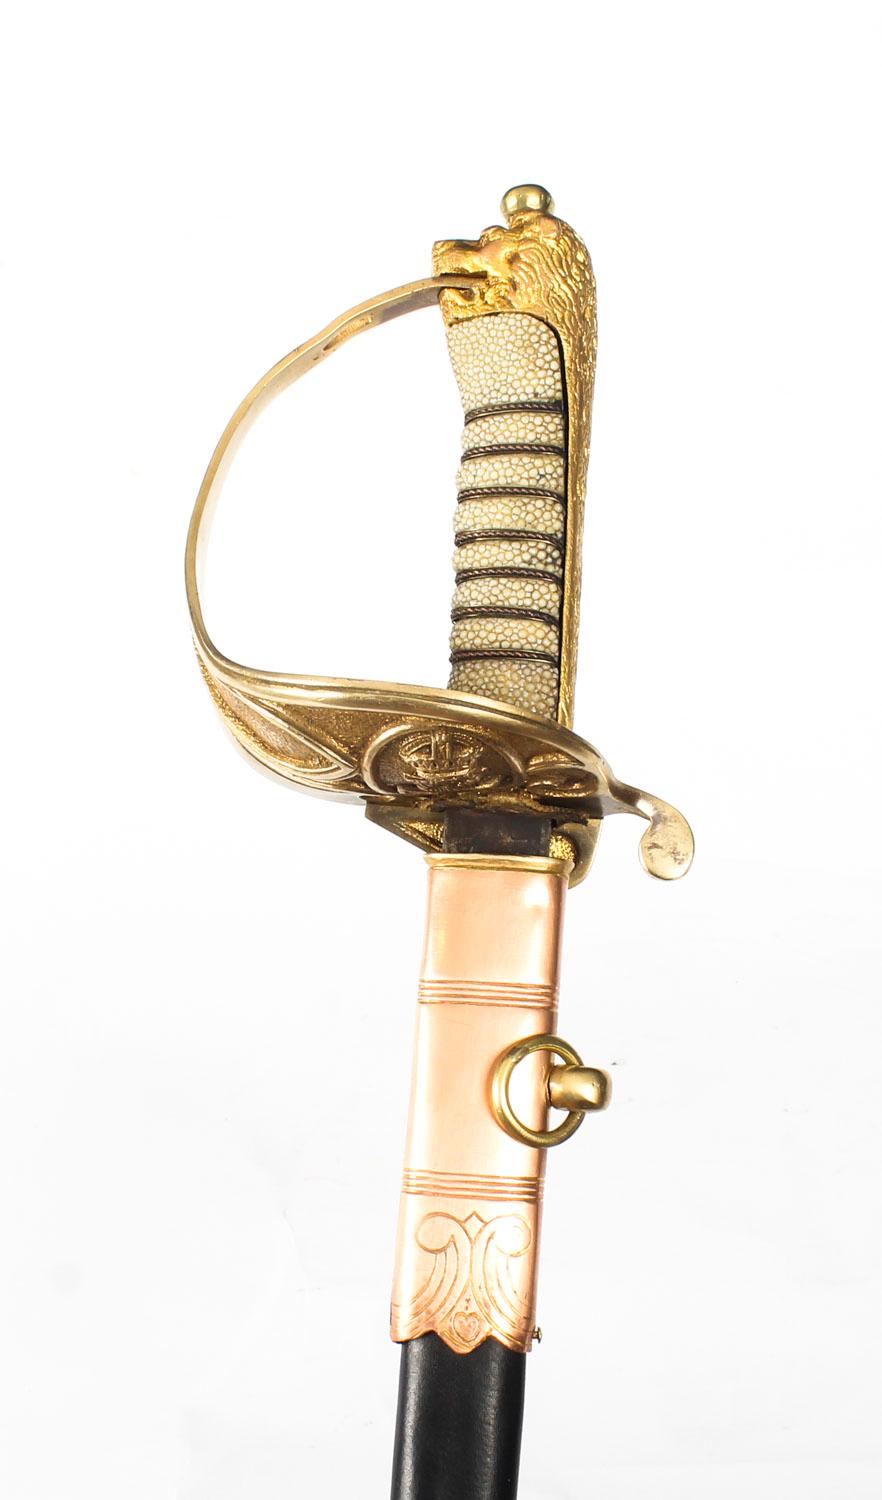 A superb antique Naval Officers Sword in leather mounted scabbard by H.A. Friedberg, 8 Queens Street, London, stamped 1897.

The sword features a brass foliage basket with a crown and anchor plaque and a decorative shagreen hilt that terminates in